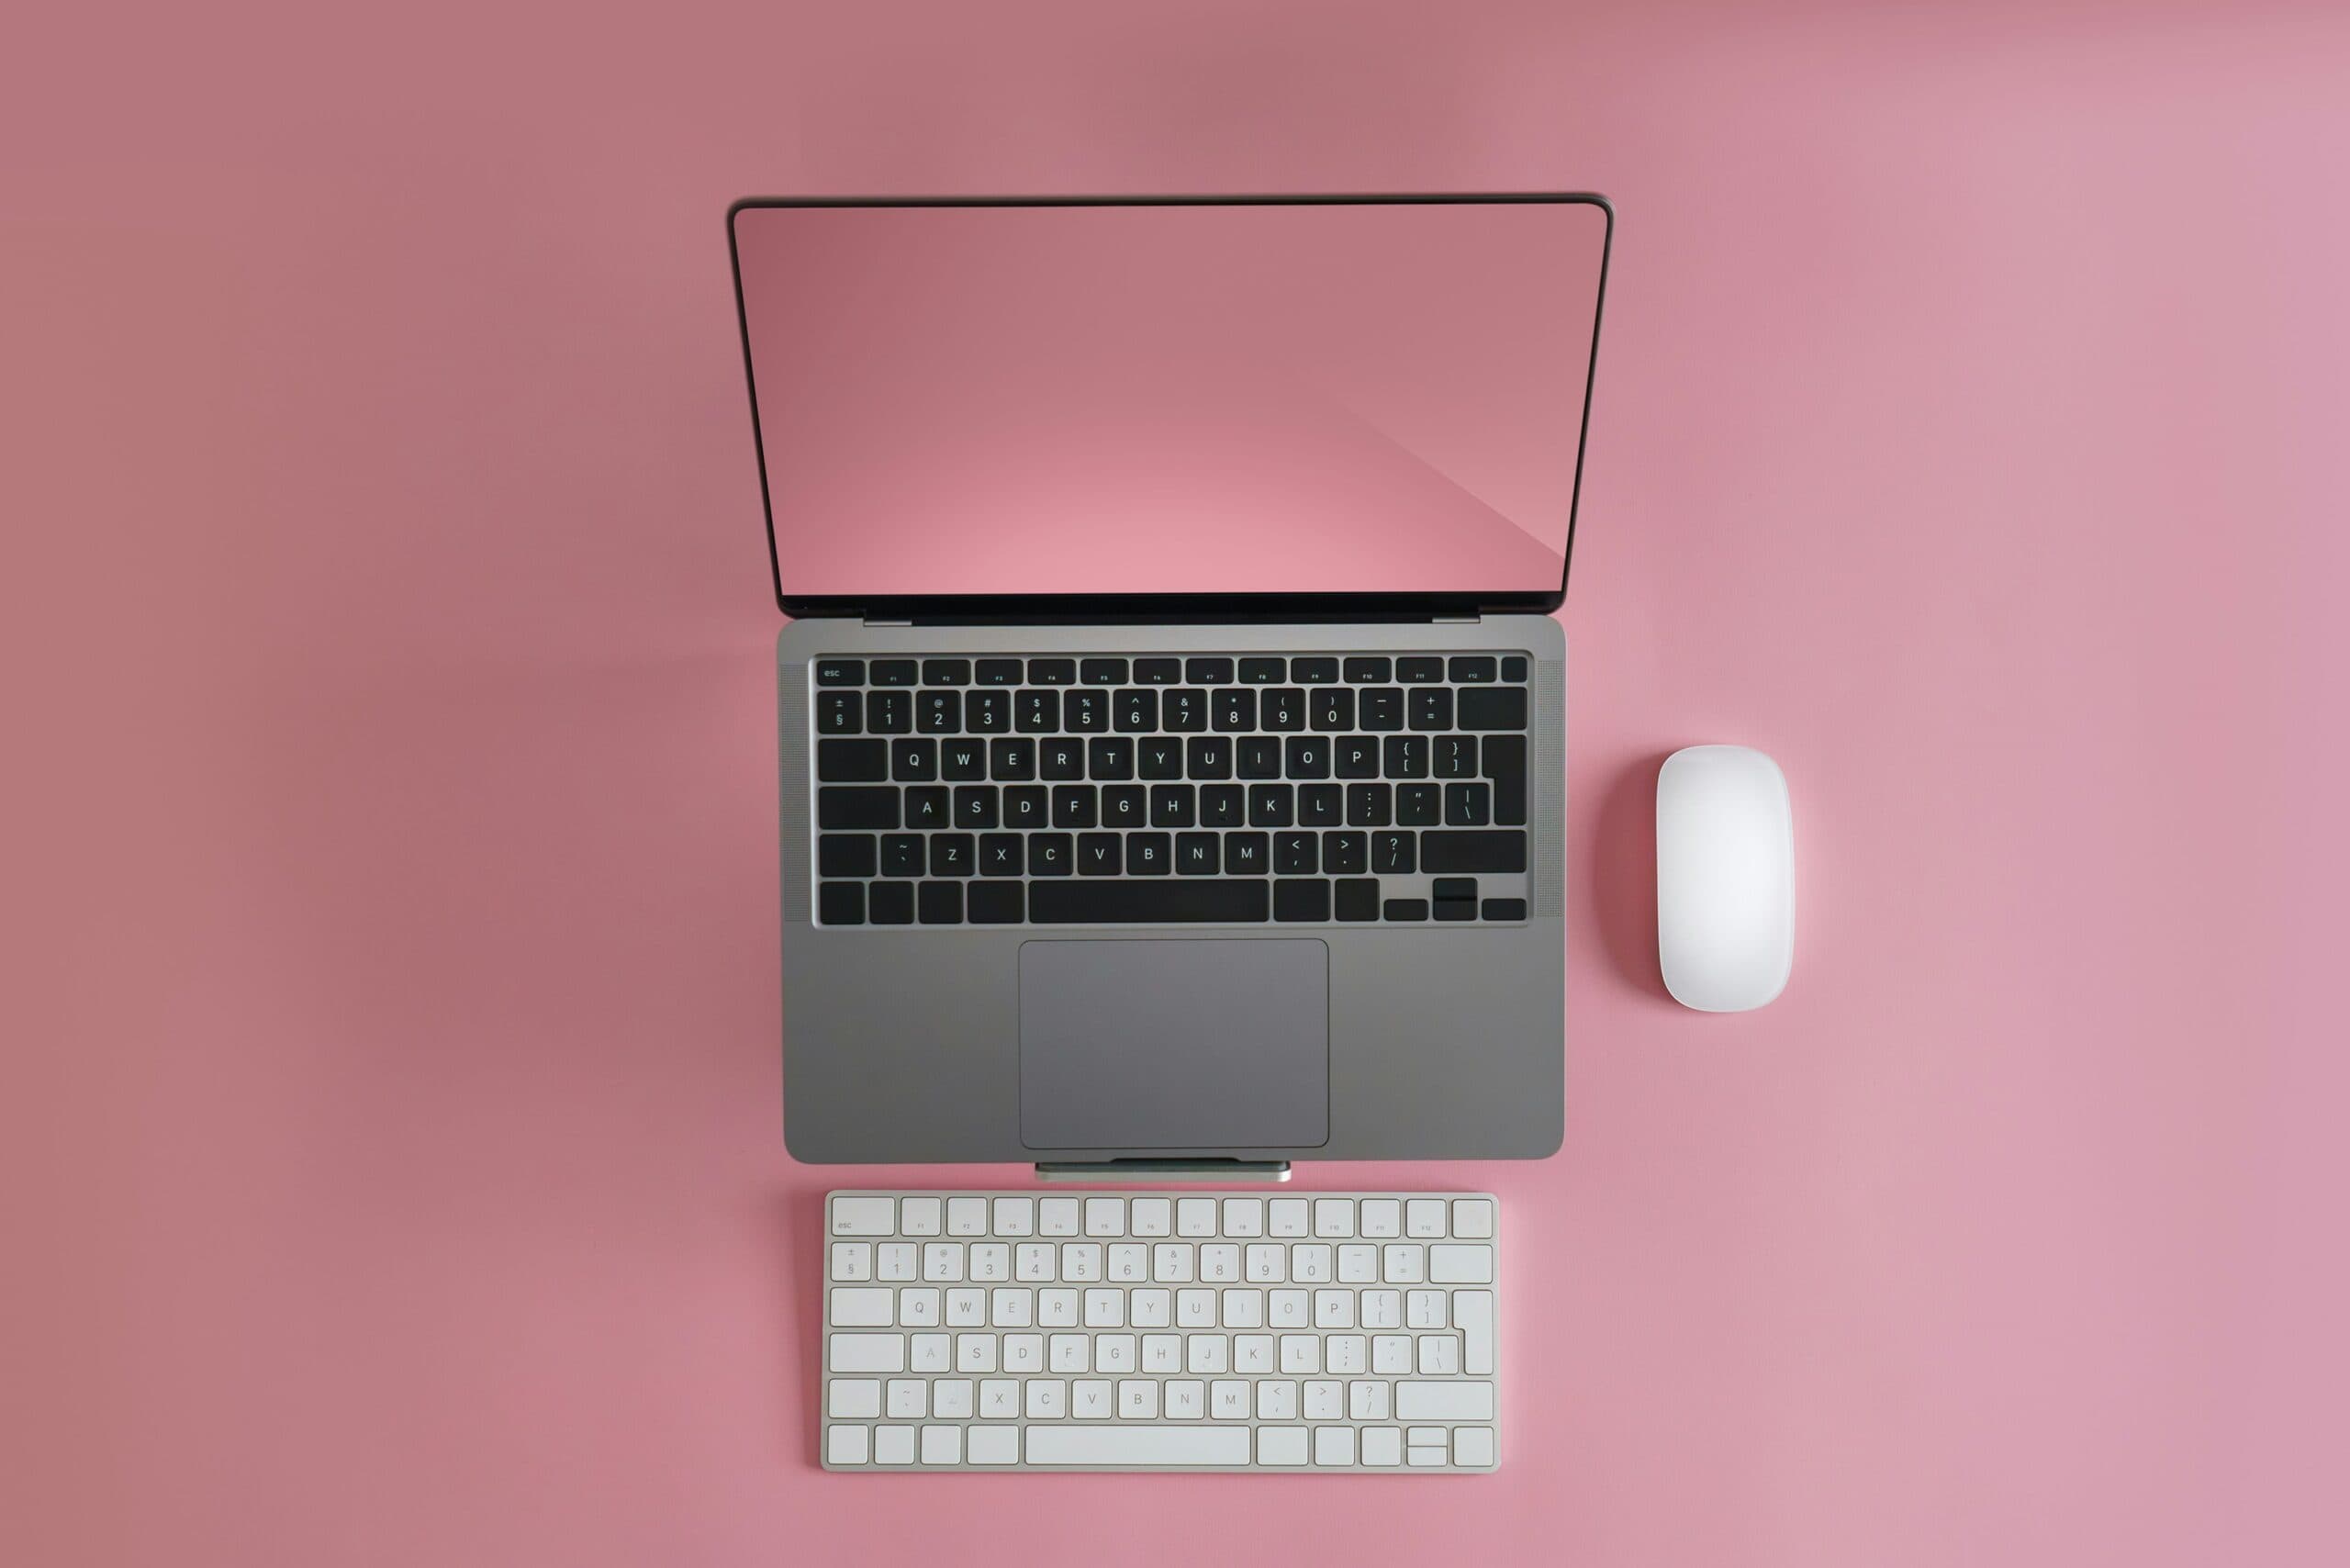 laptop with mouse and keyboard on solid pink background